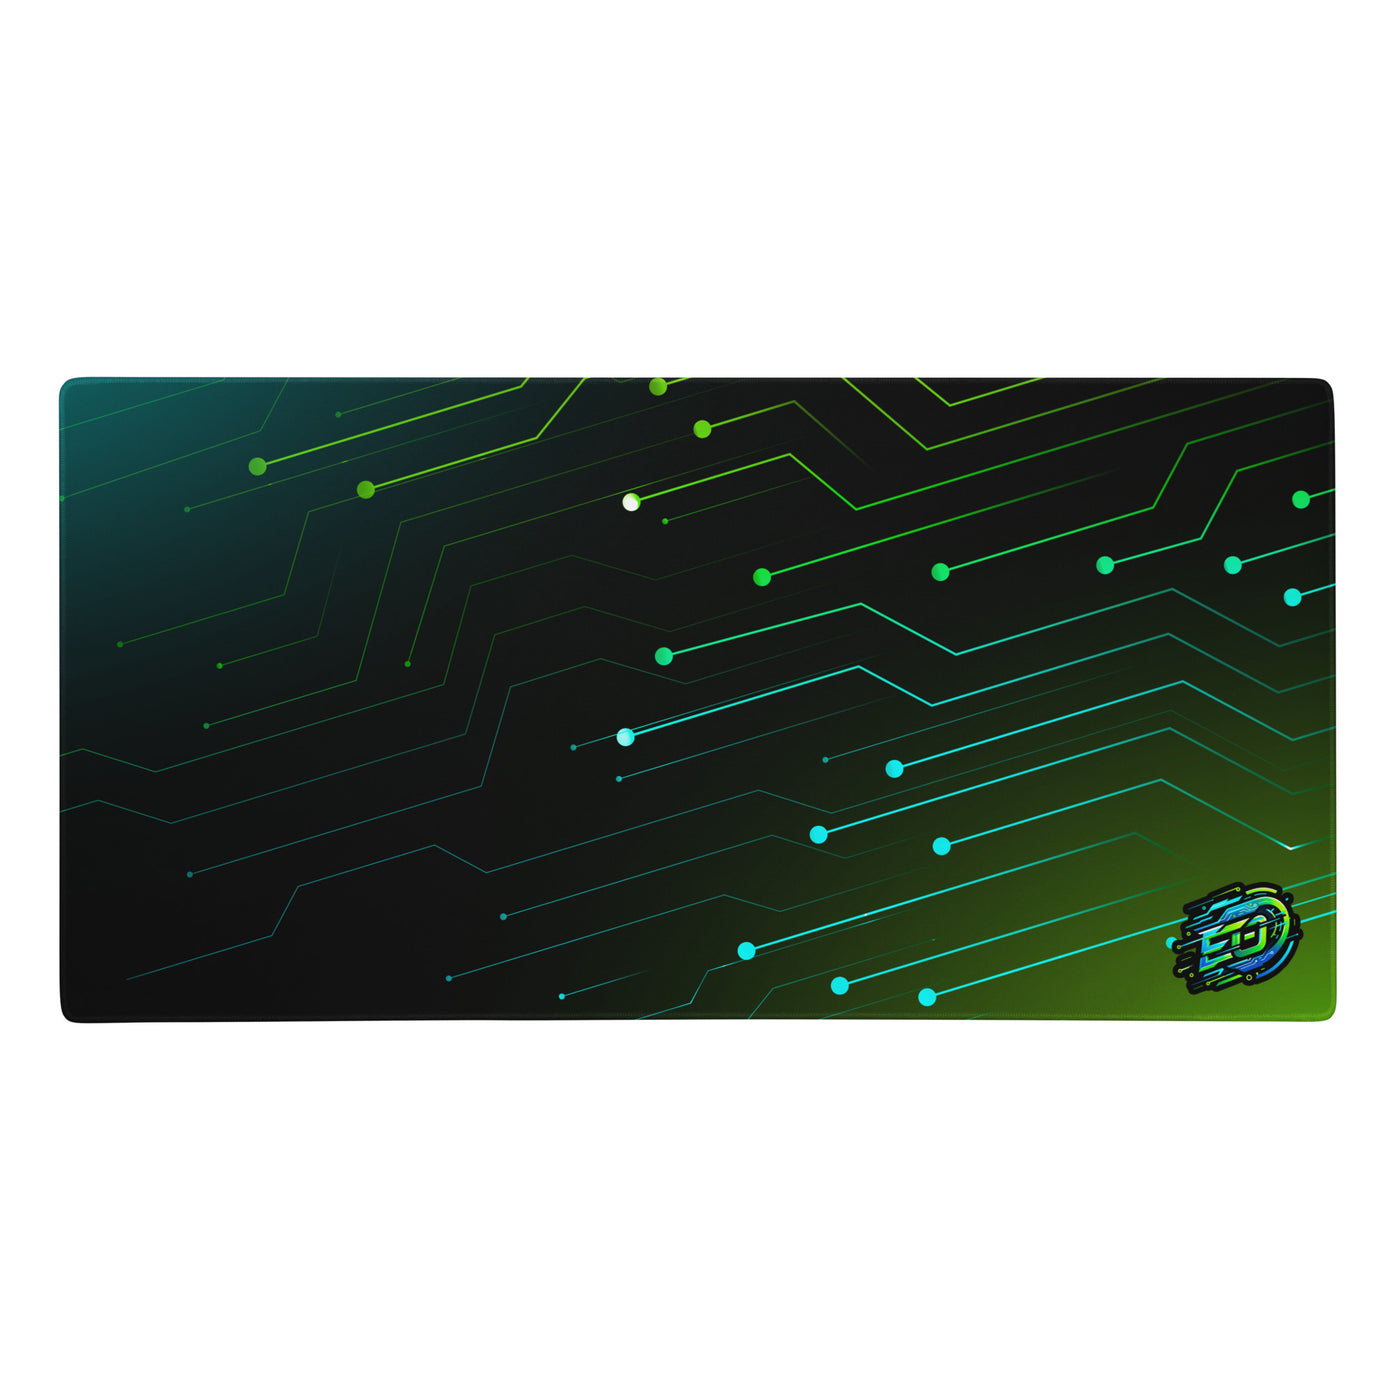 Project EO Gaming mouse pad